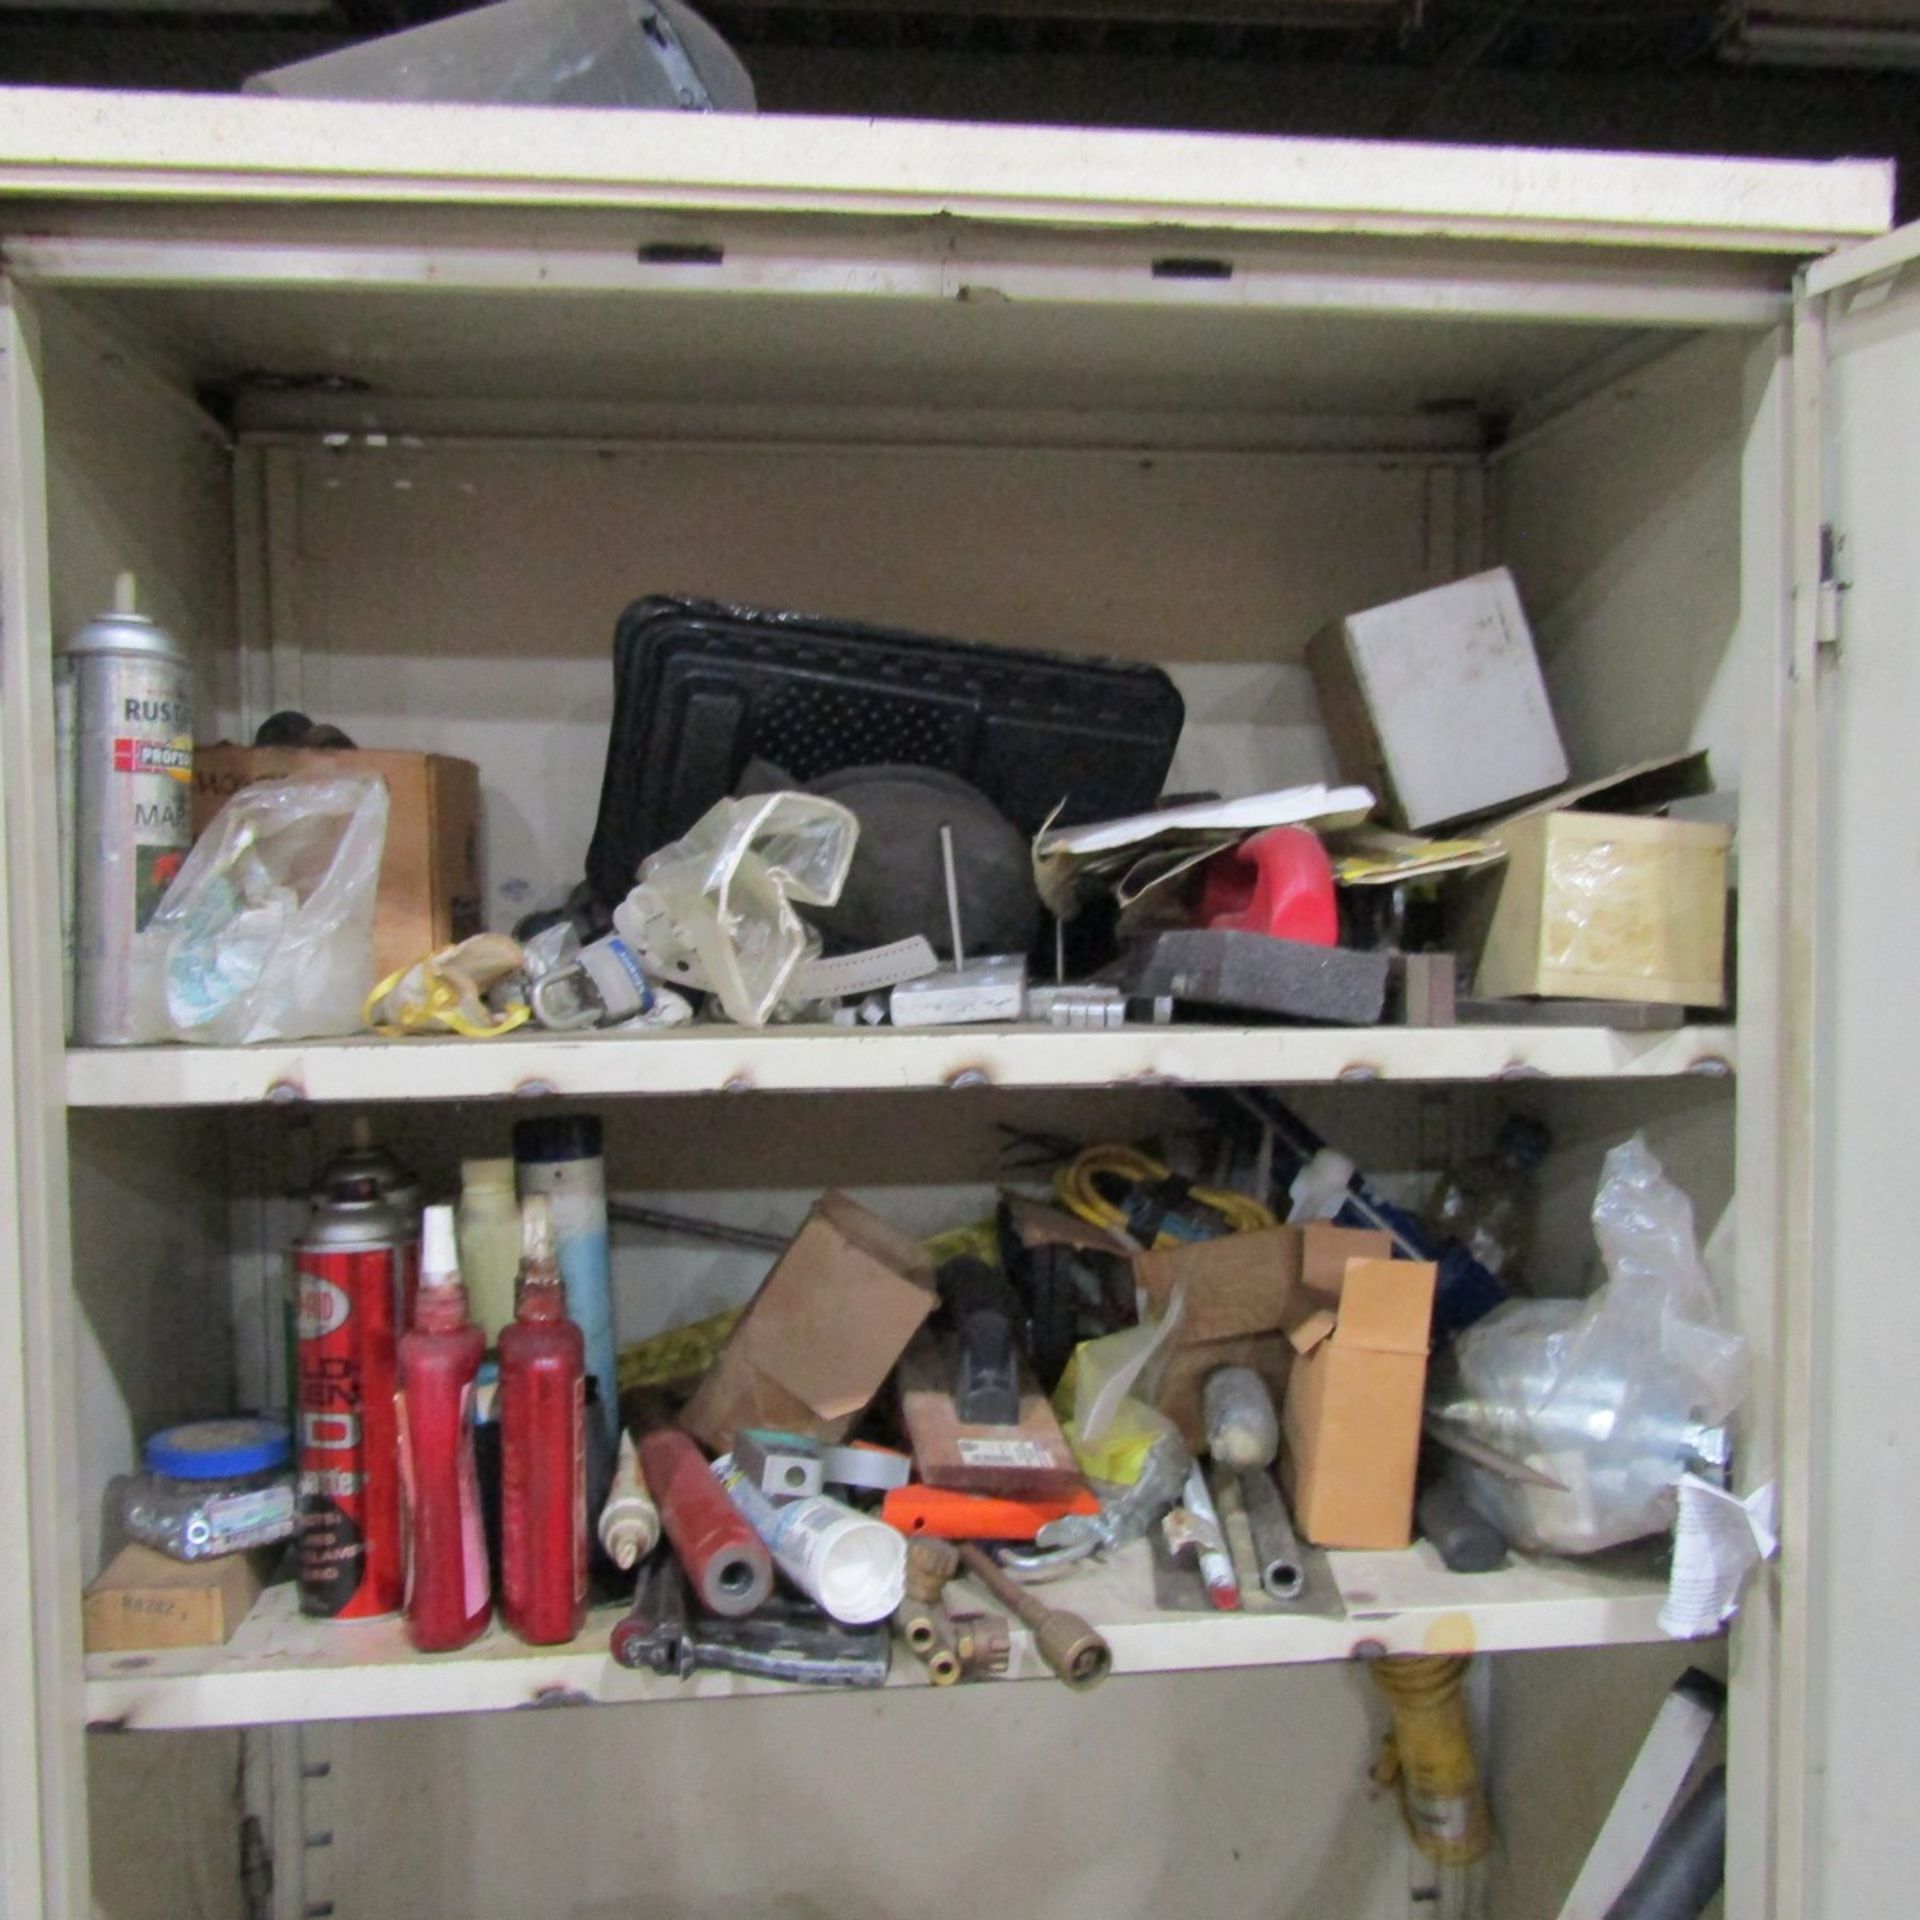 2-Door Cabinet with Contents, to Include: Sanding Discs, Face Masks, Grout Scrappers, Welding - Image 2 of 3